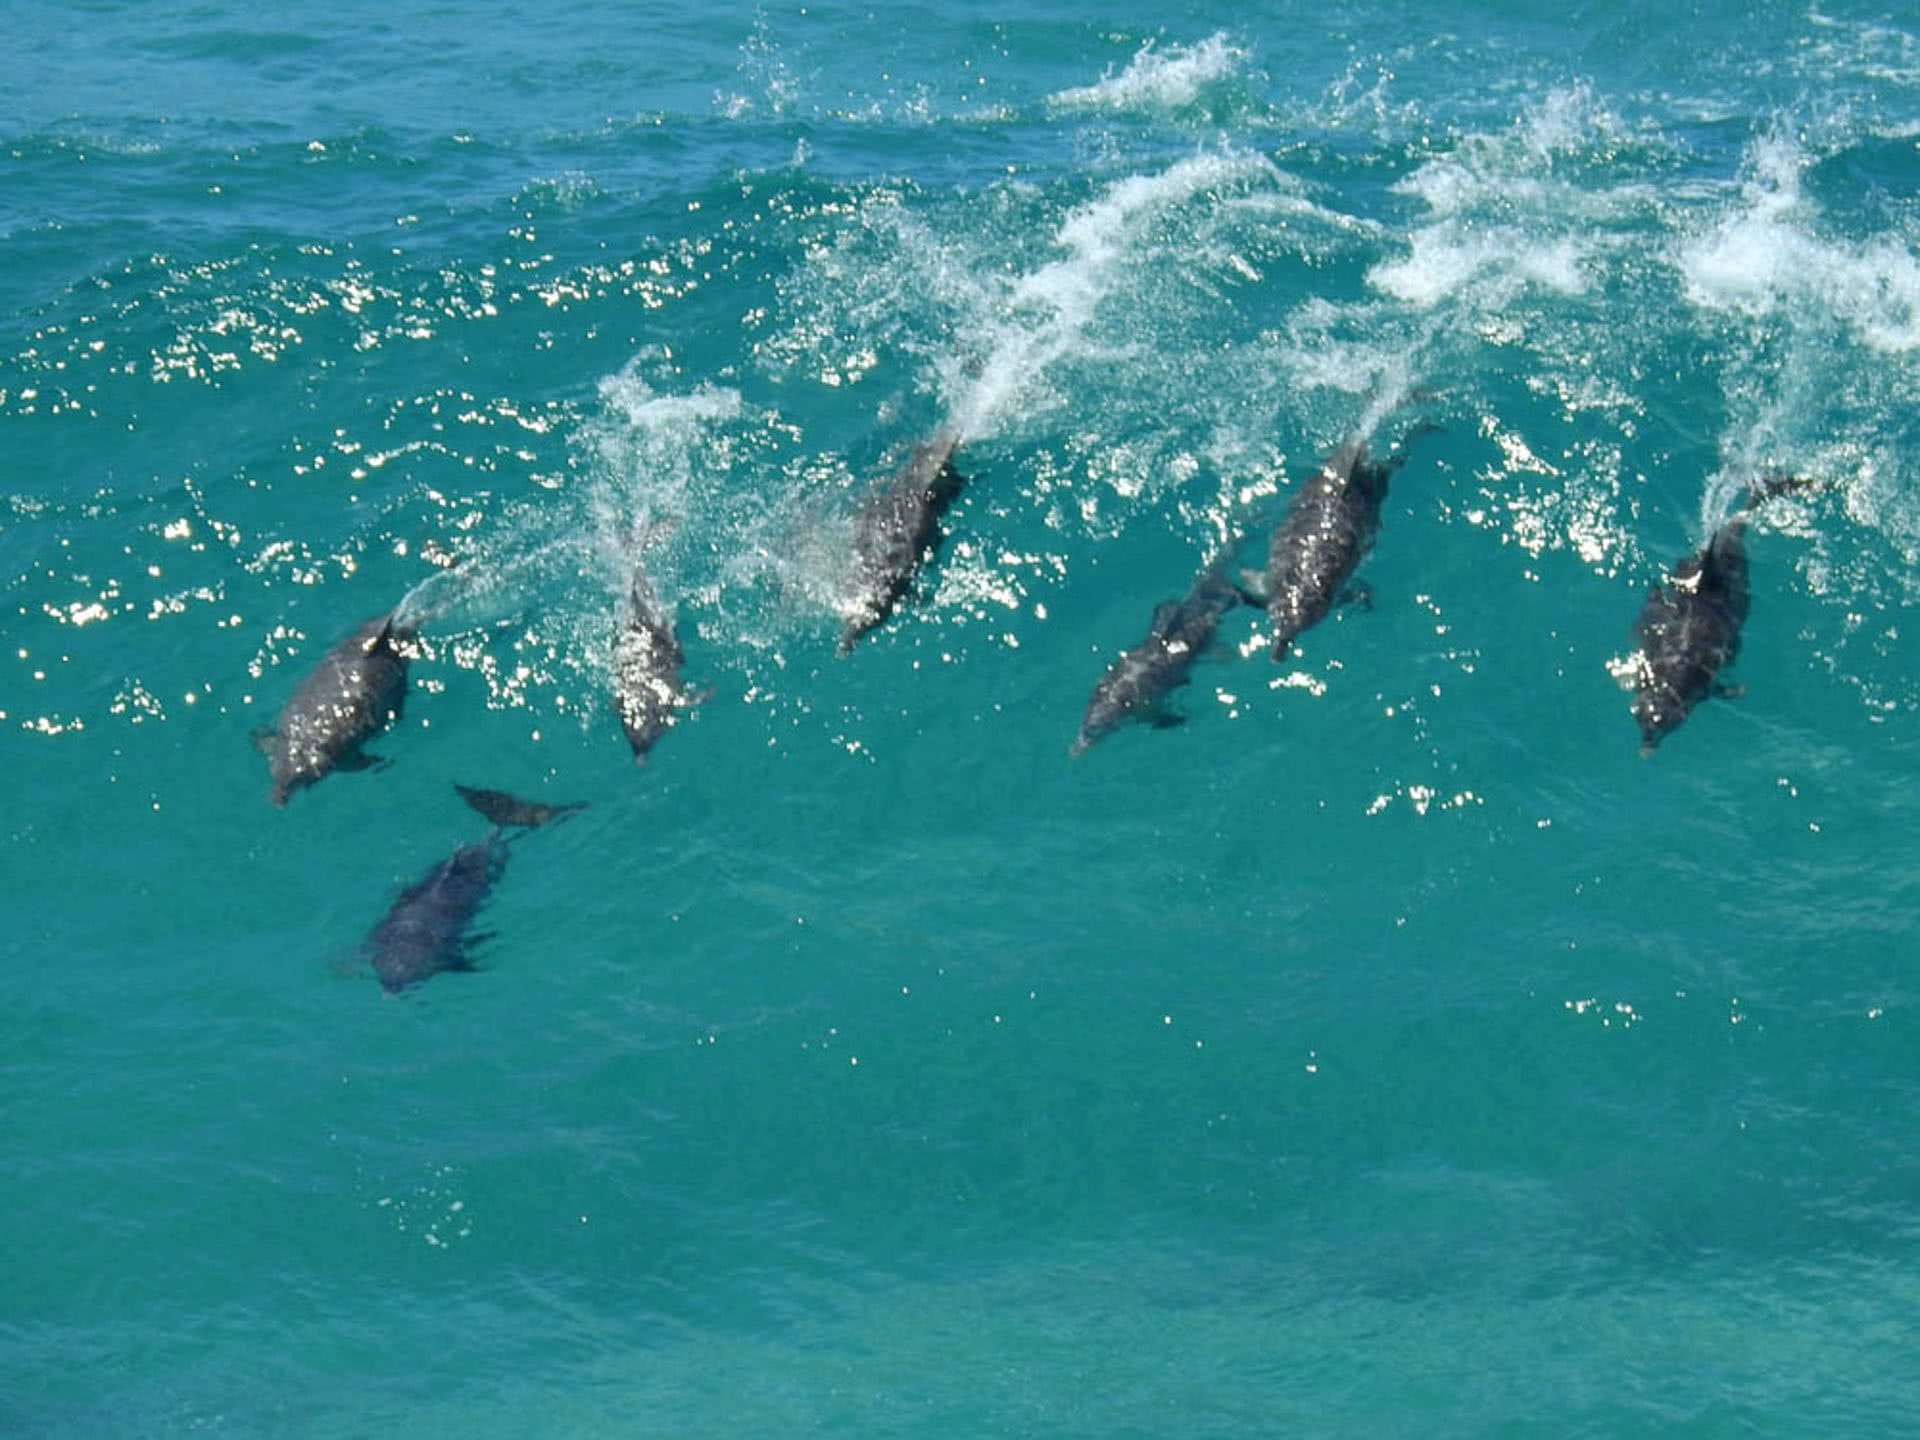 Whale Watch From the Gorge Walk on North Stradbroke Island (QLD), Megan Forbes, dolphins, surfing, ocean, wave, pod